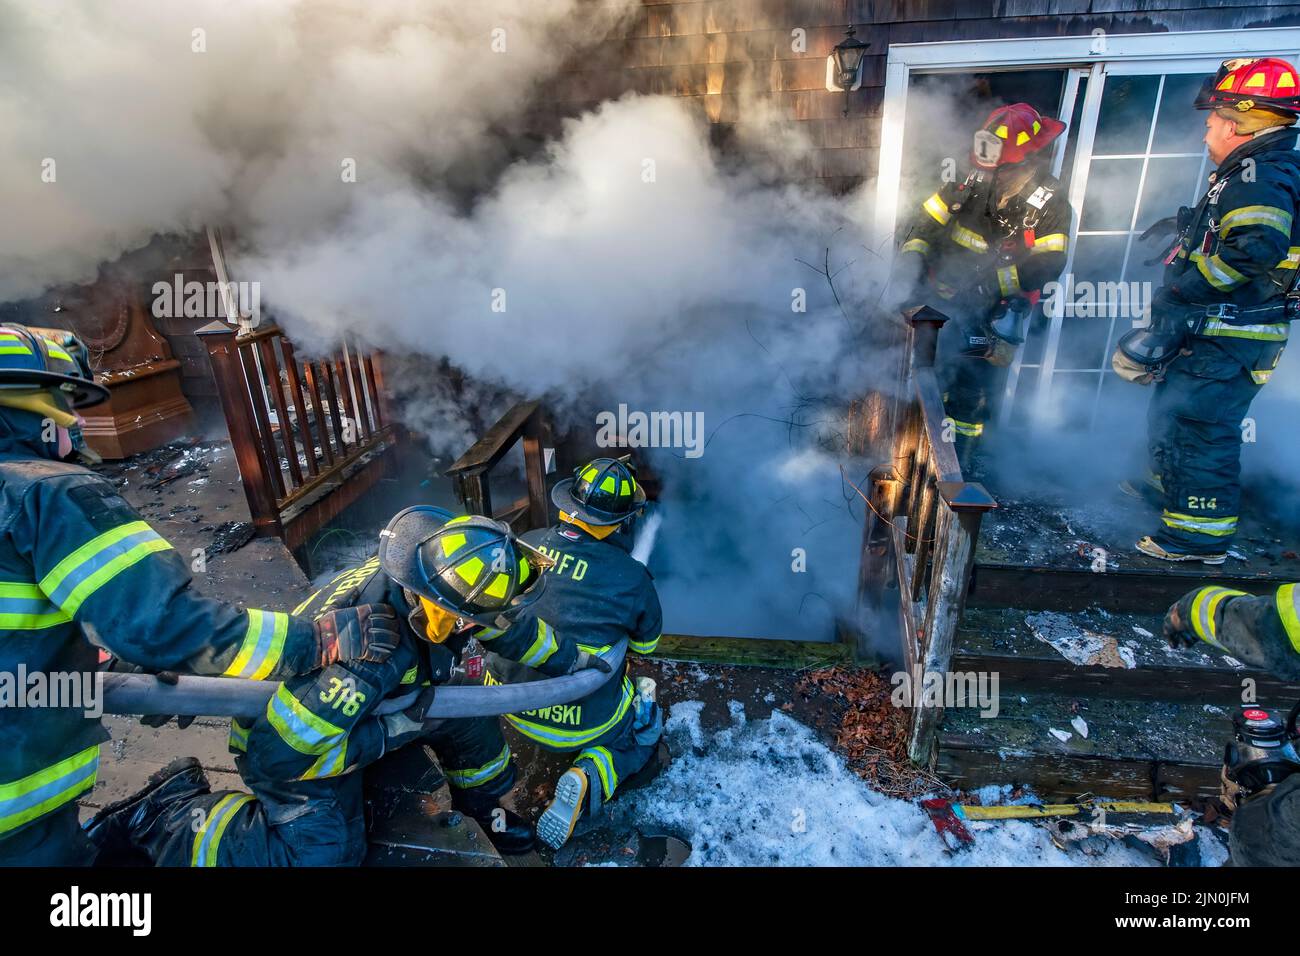 A team of three firefighters works to extinguish fire in the basement of the building as shortly before 6:00 a.m. on Saturday, March 8th, 2014 the Bri Stock Photo